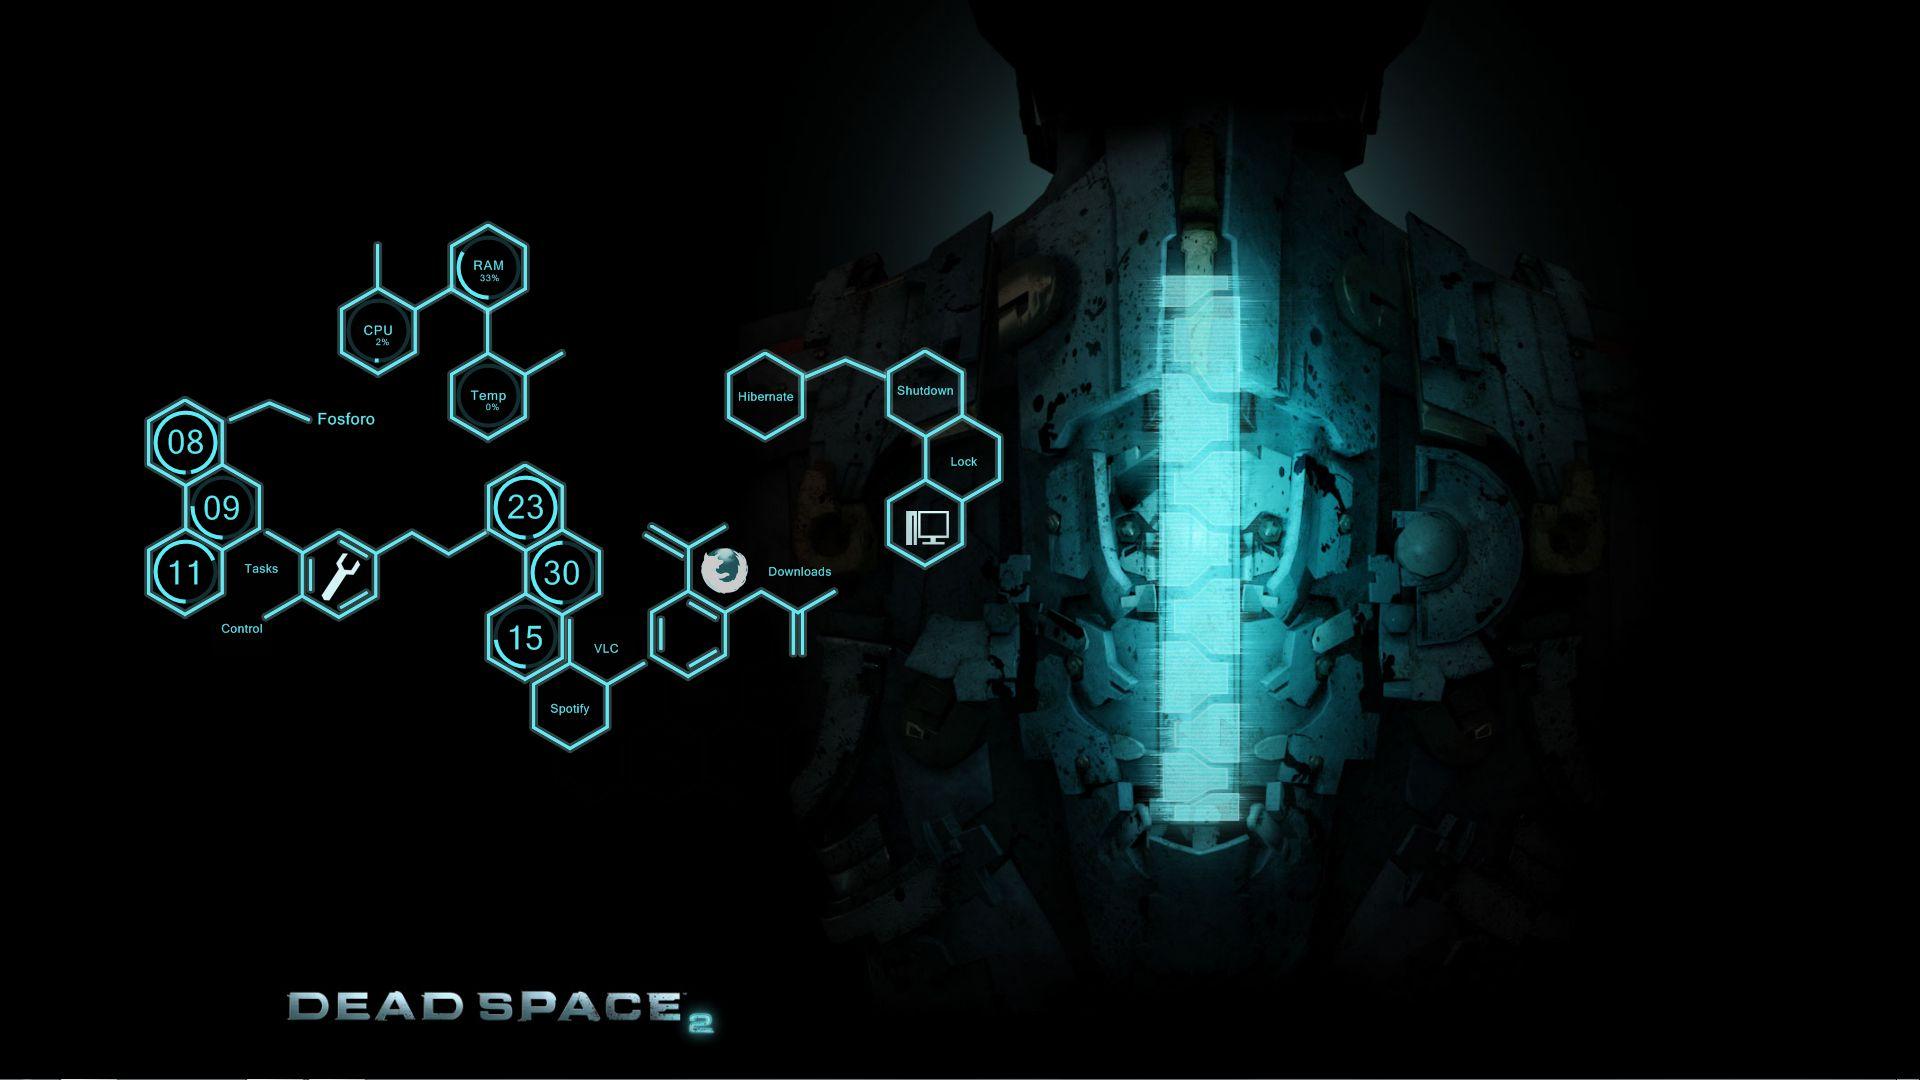 Dead space wallpaper Gallery. Beautiful and Interesting Image